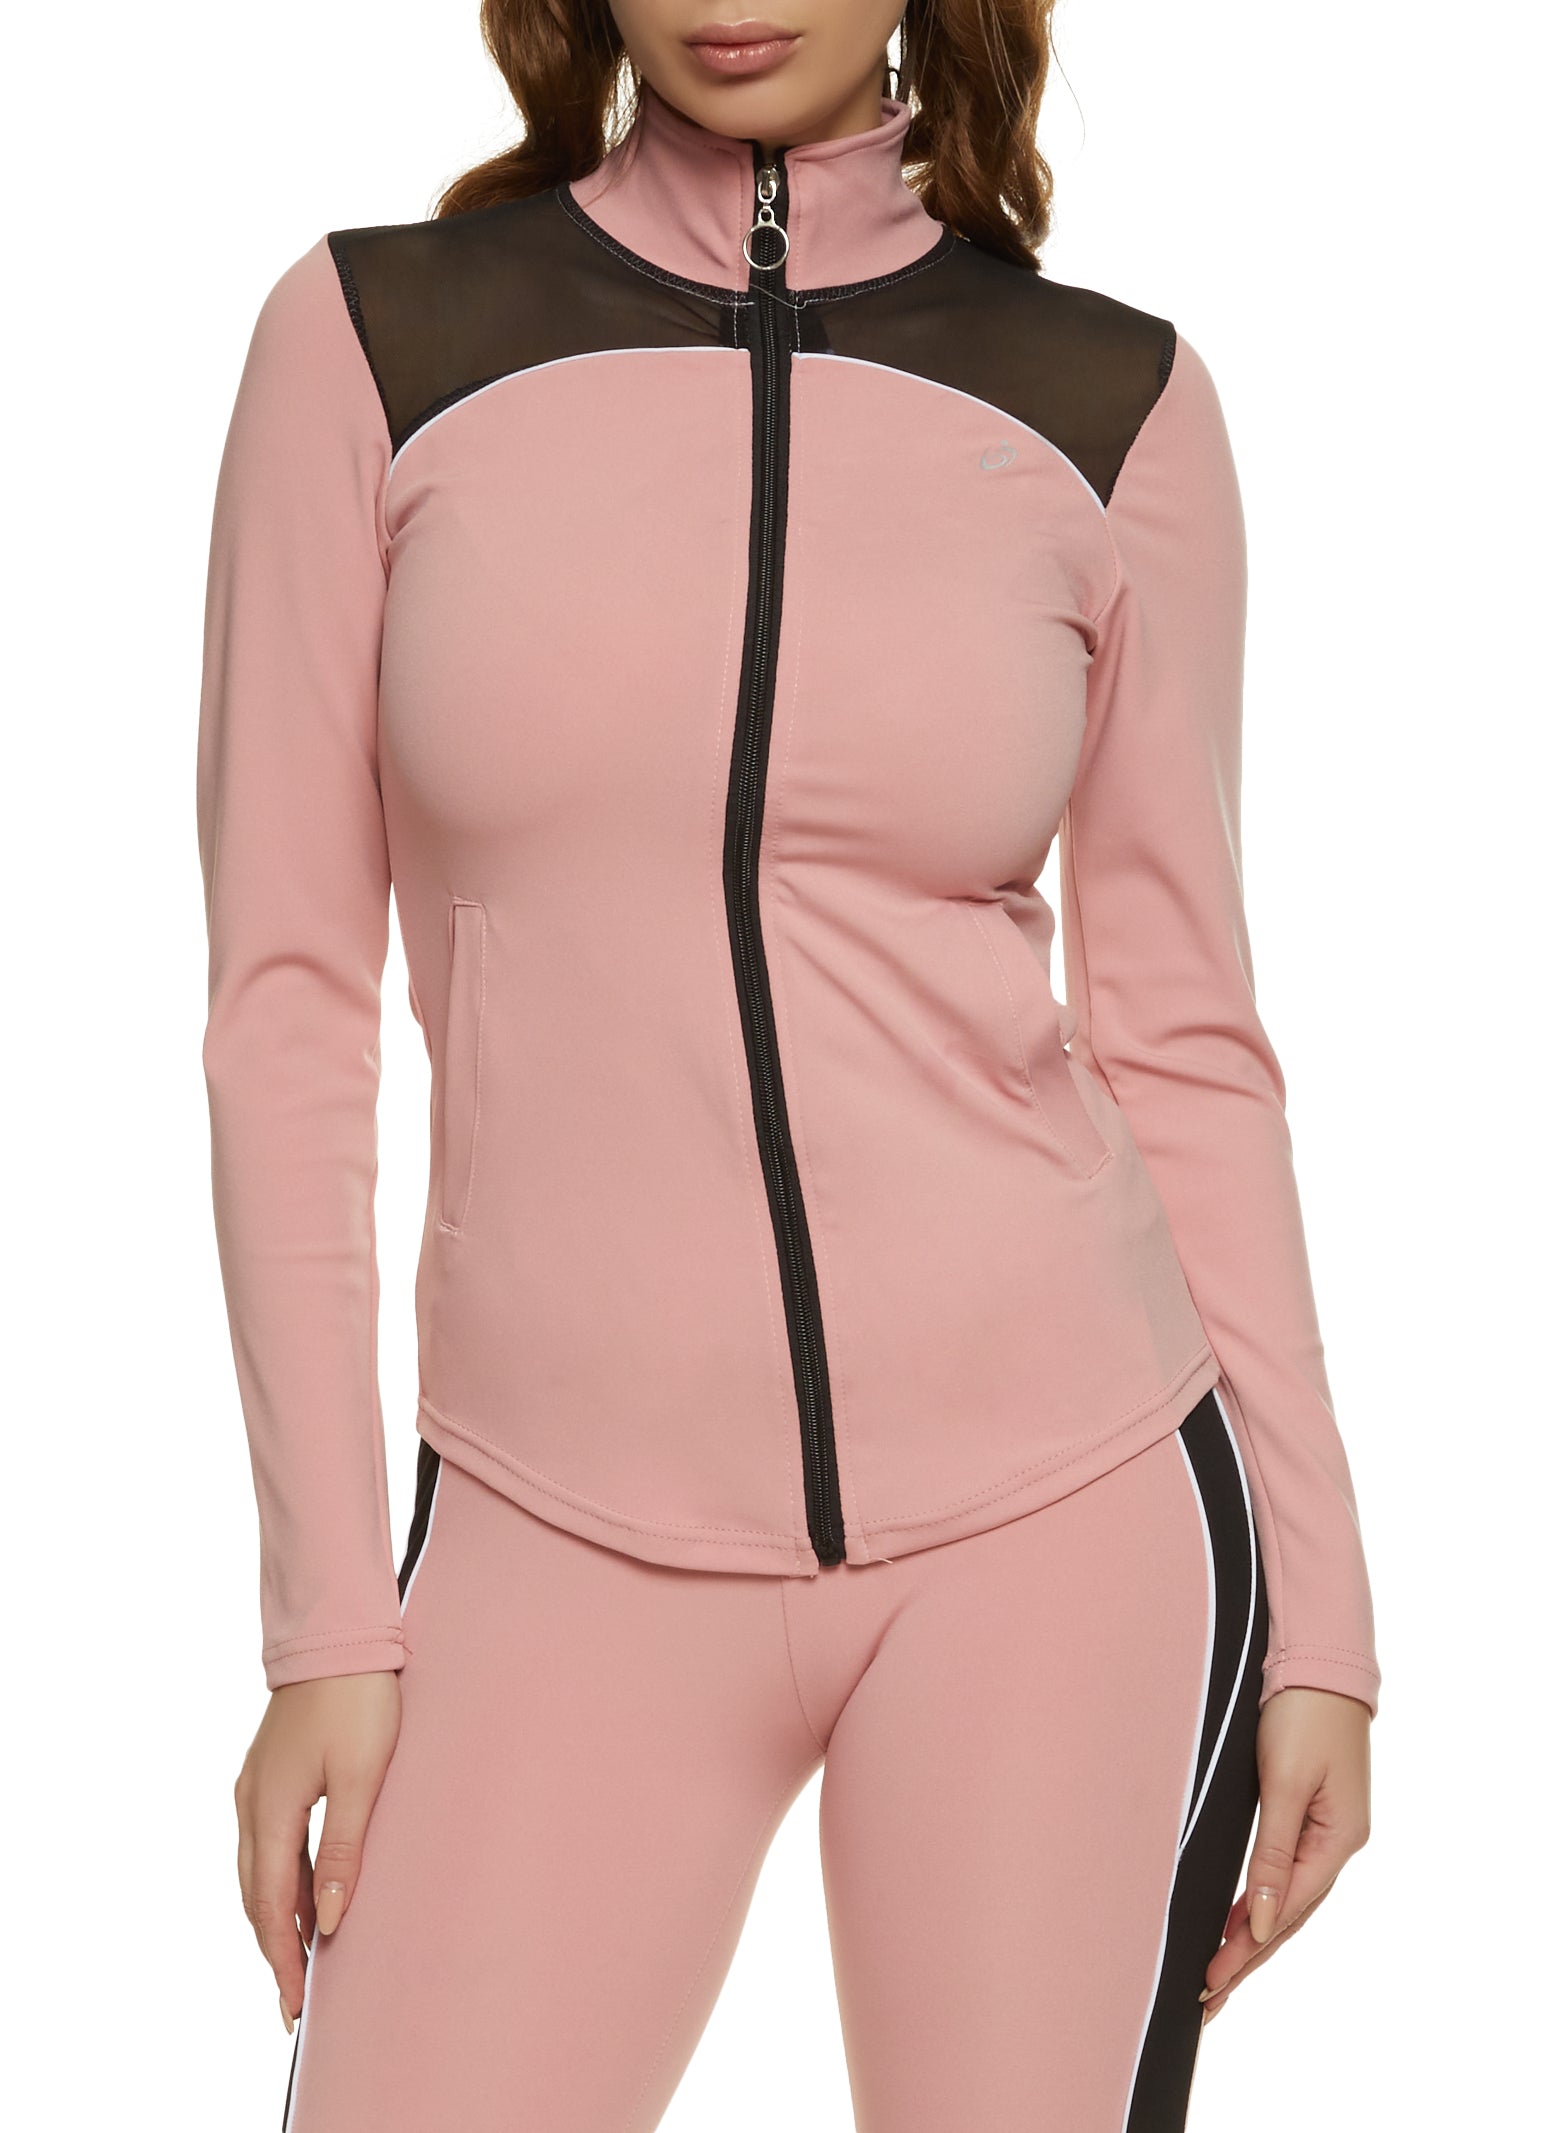 Womens Mesh Insert Track Jacket, Pink, Size S